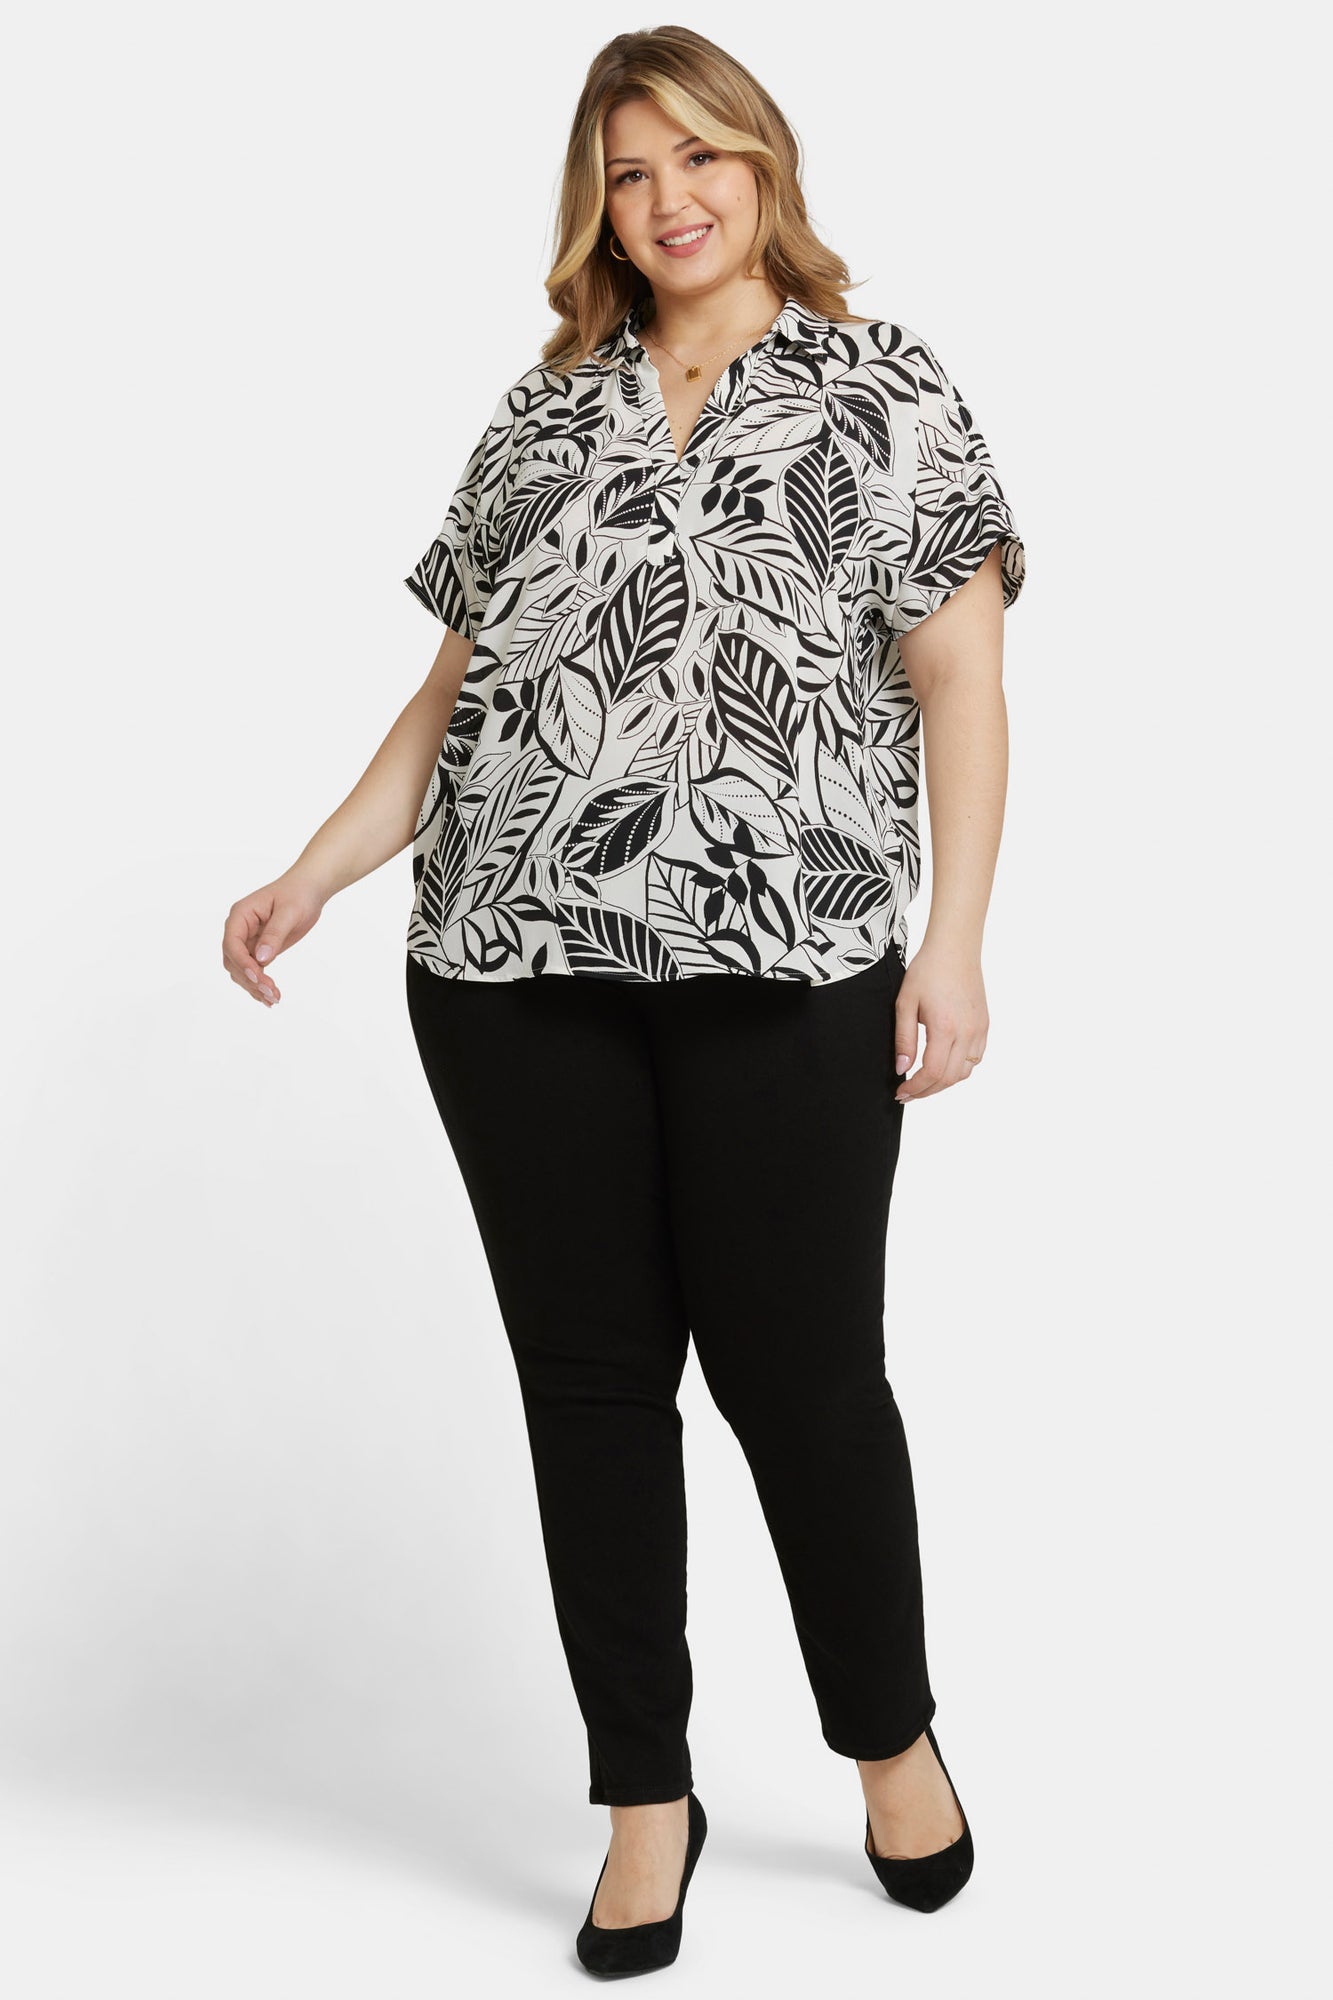 NYDJ Becky Short Sleeved Blouse In Plus Size  - Gerania